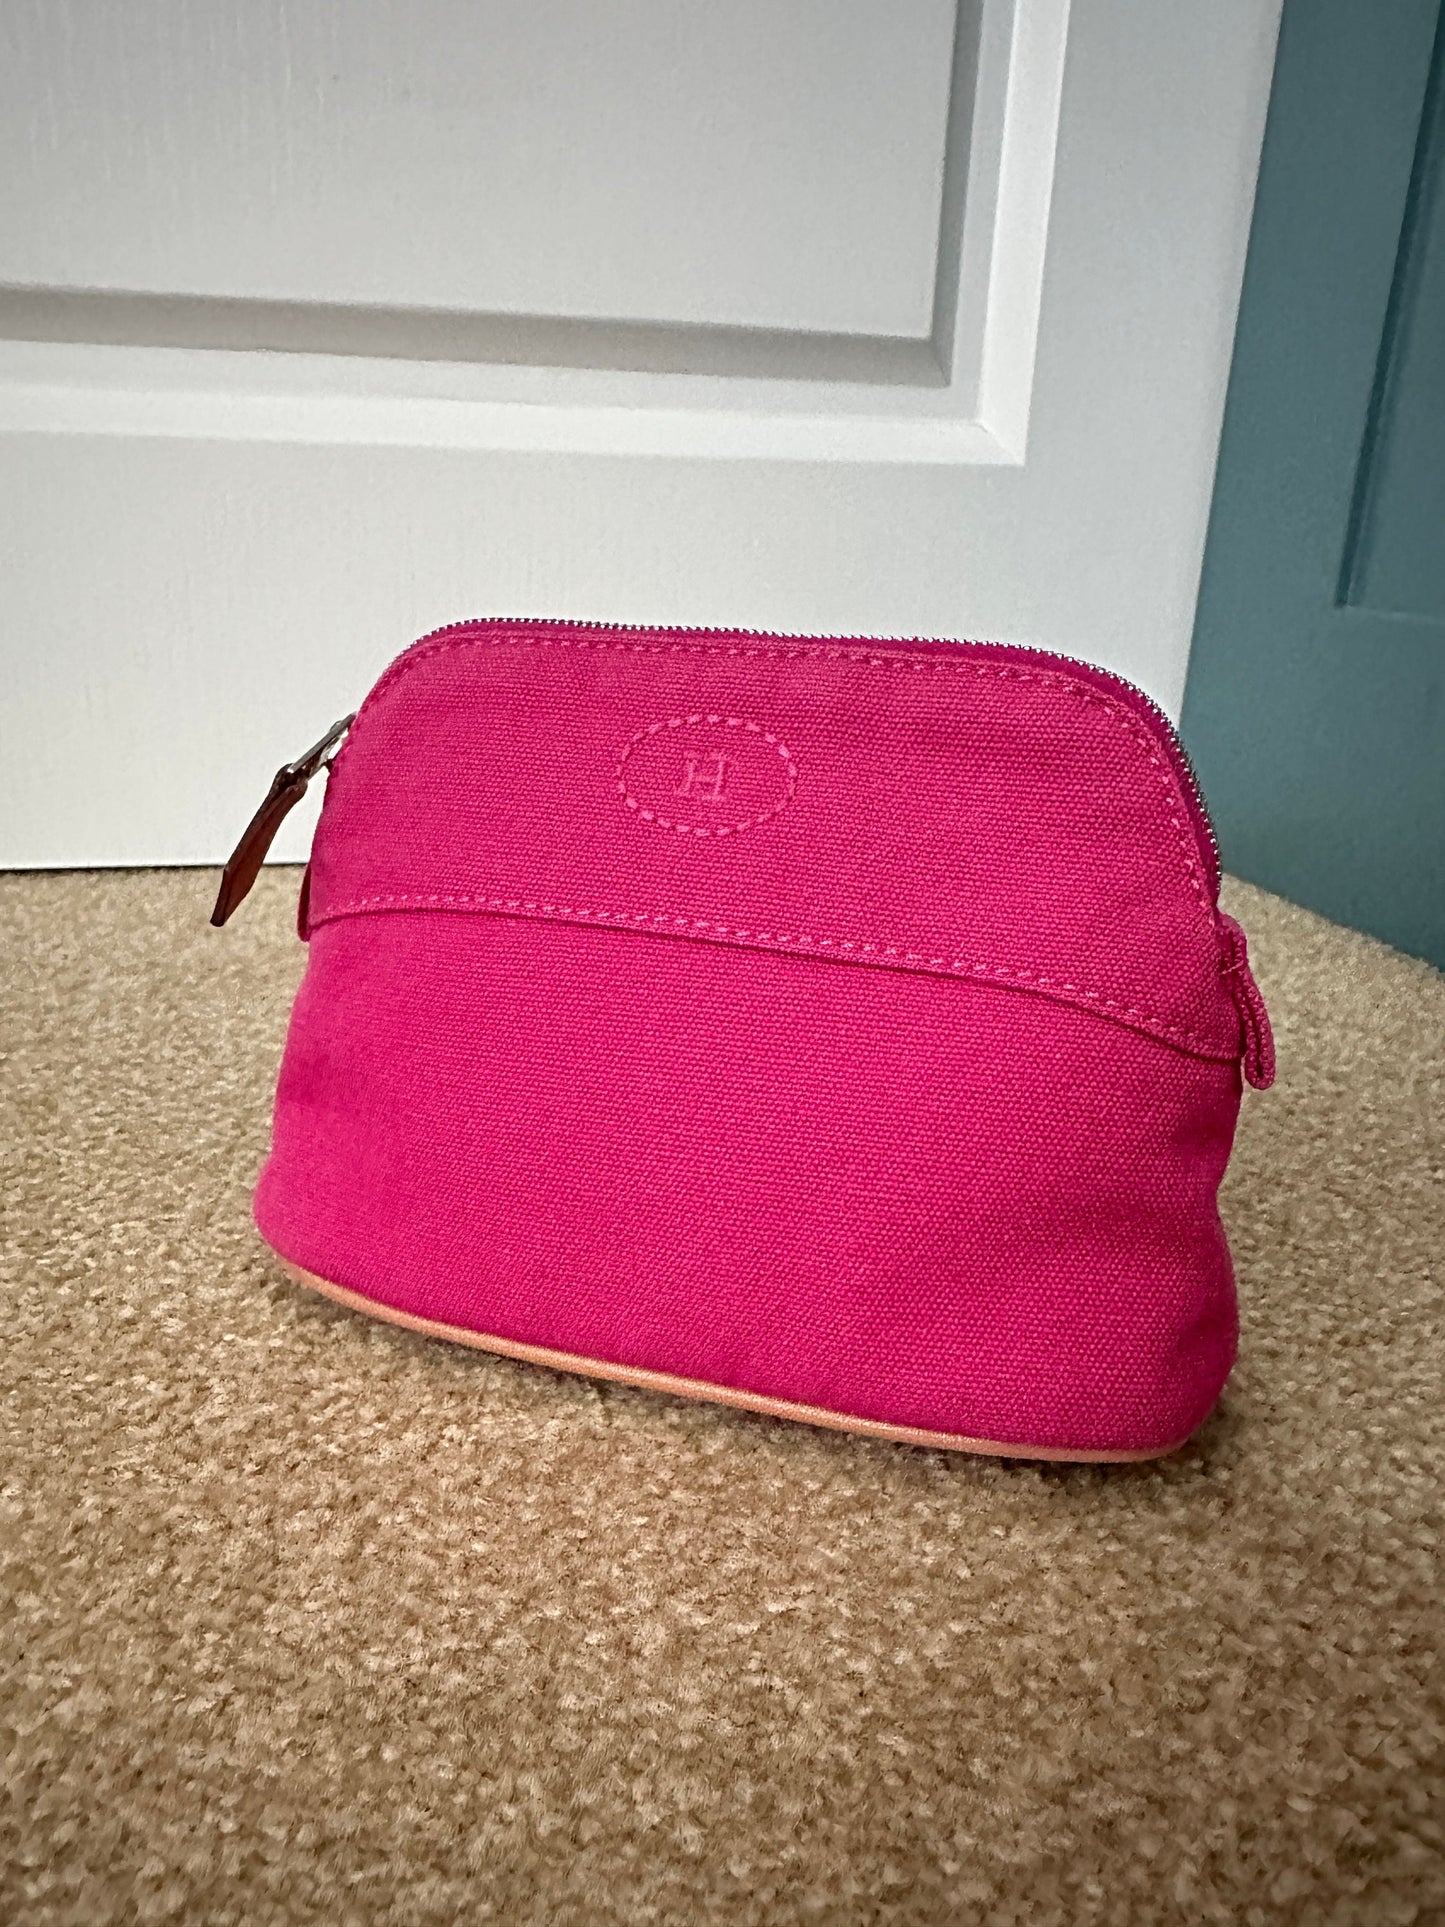 HERMES VINTAGE 100% Authentic Genuine Canvas Bolide Makeup Pouch Case Bag, Bright Pink, Great Condition